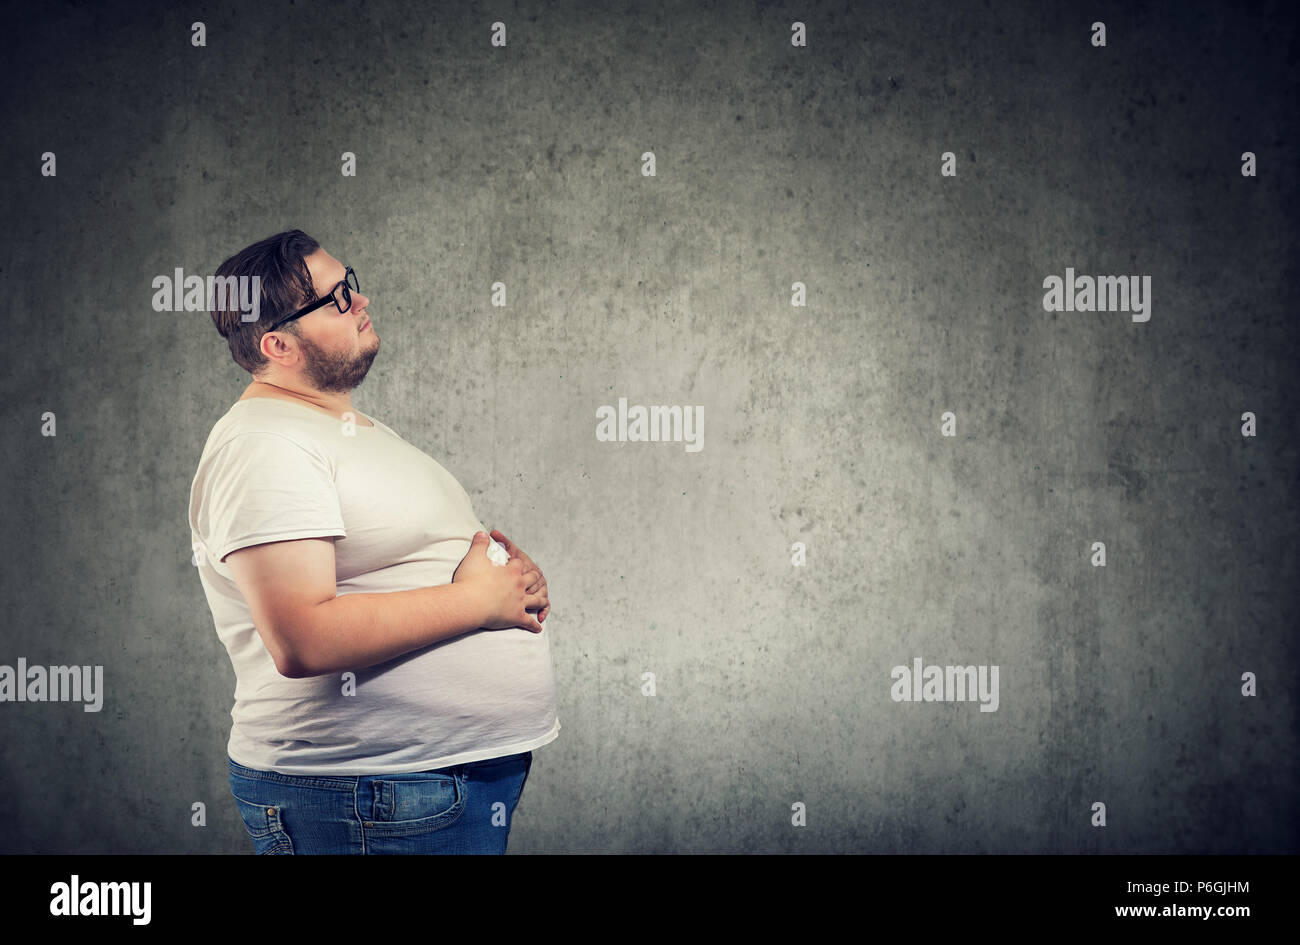 Overweight young man with big belly Stock Photo